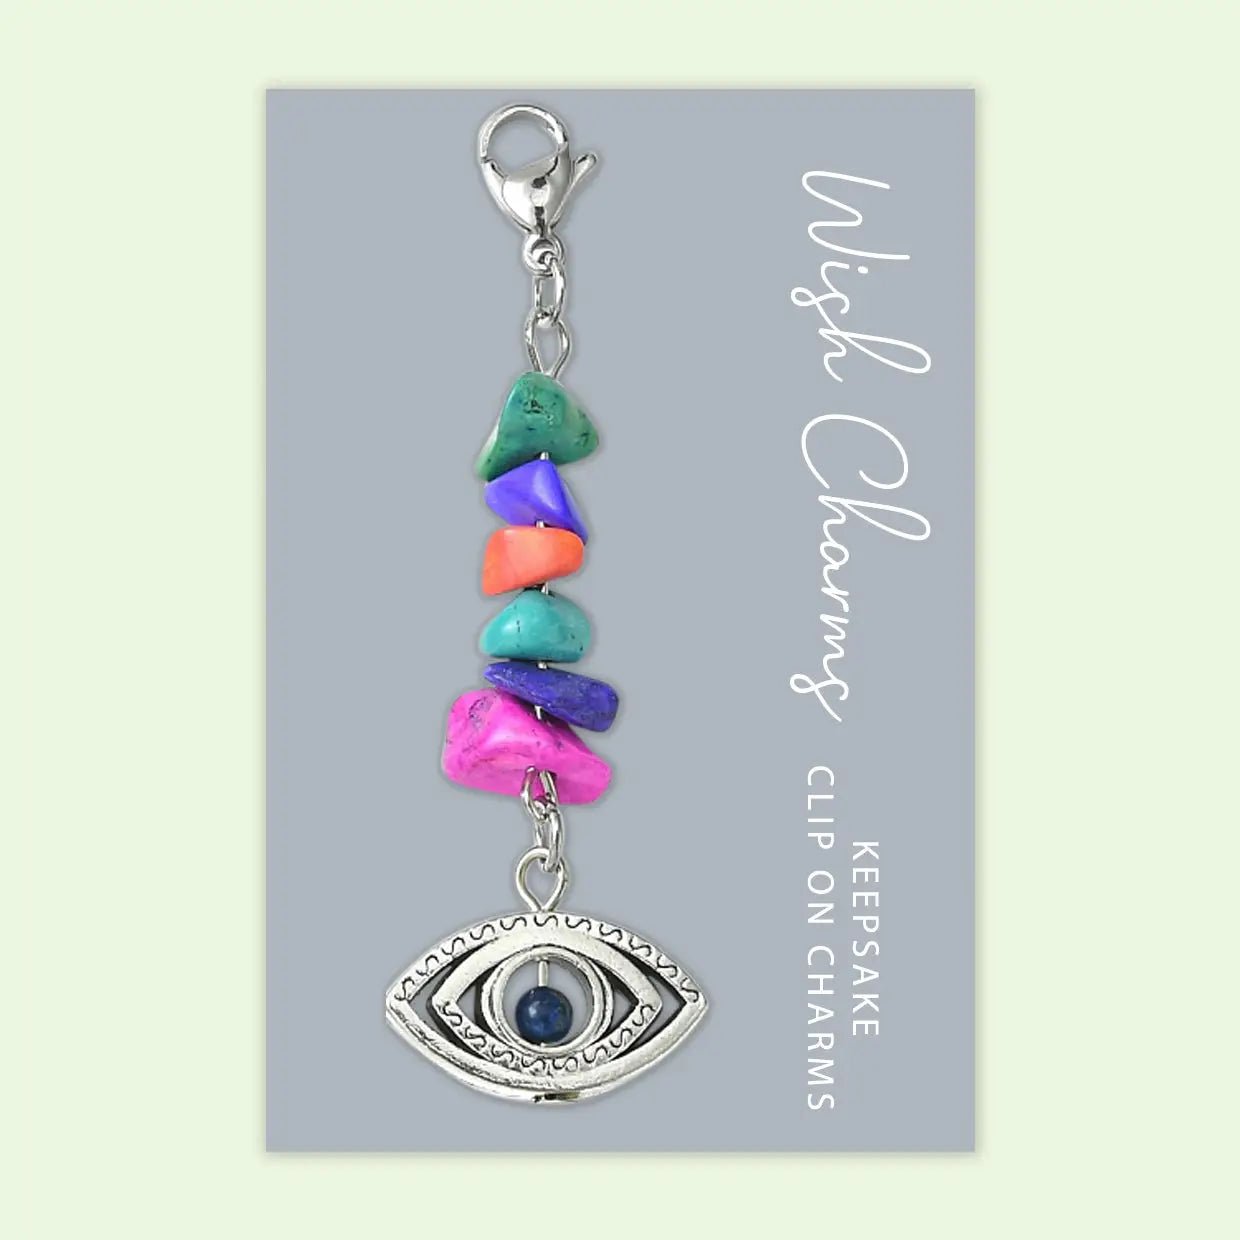 Lucky Eye - Wish Charms - Keepsake Clip On Charm with Gemstones - WCC016 - The Hare and the Moon